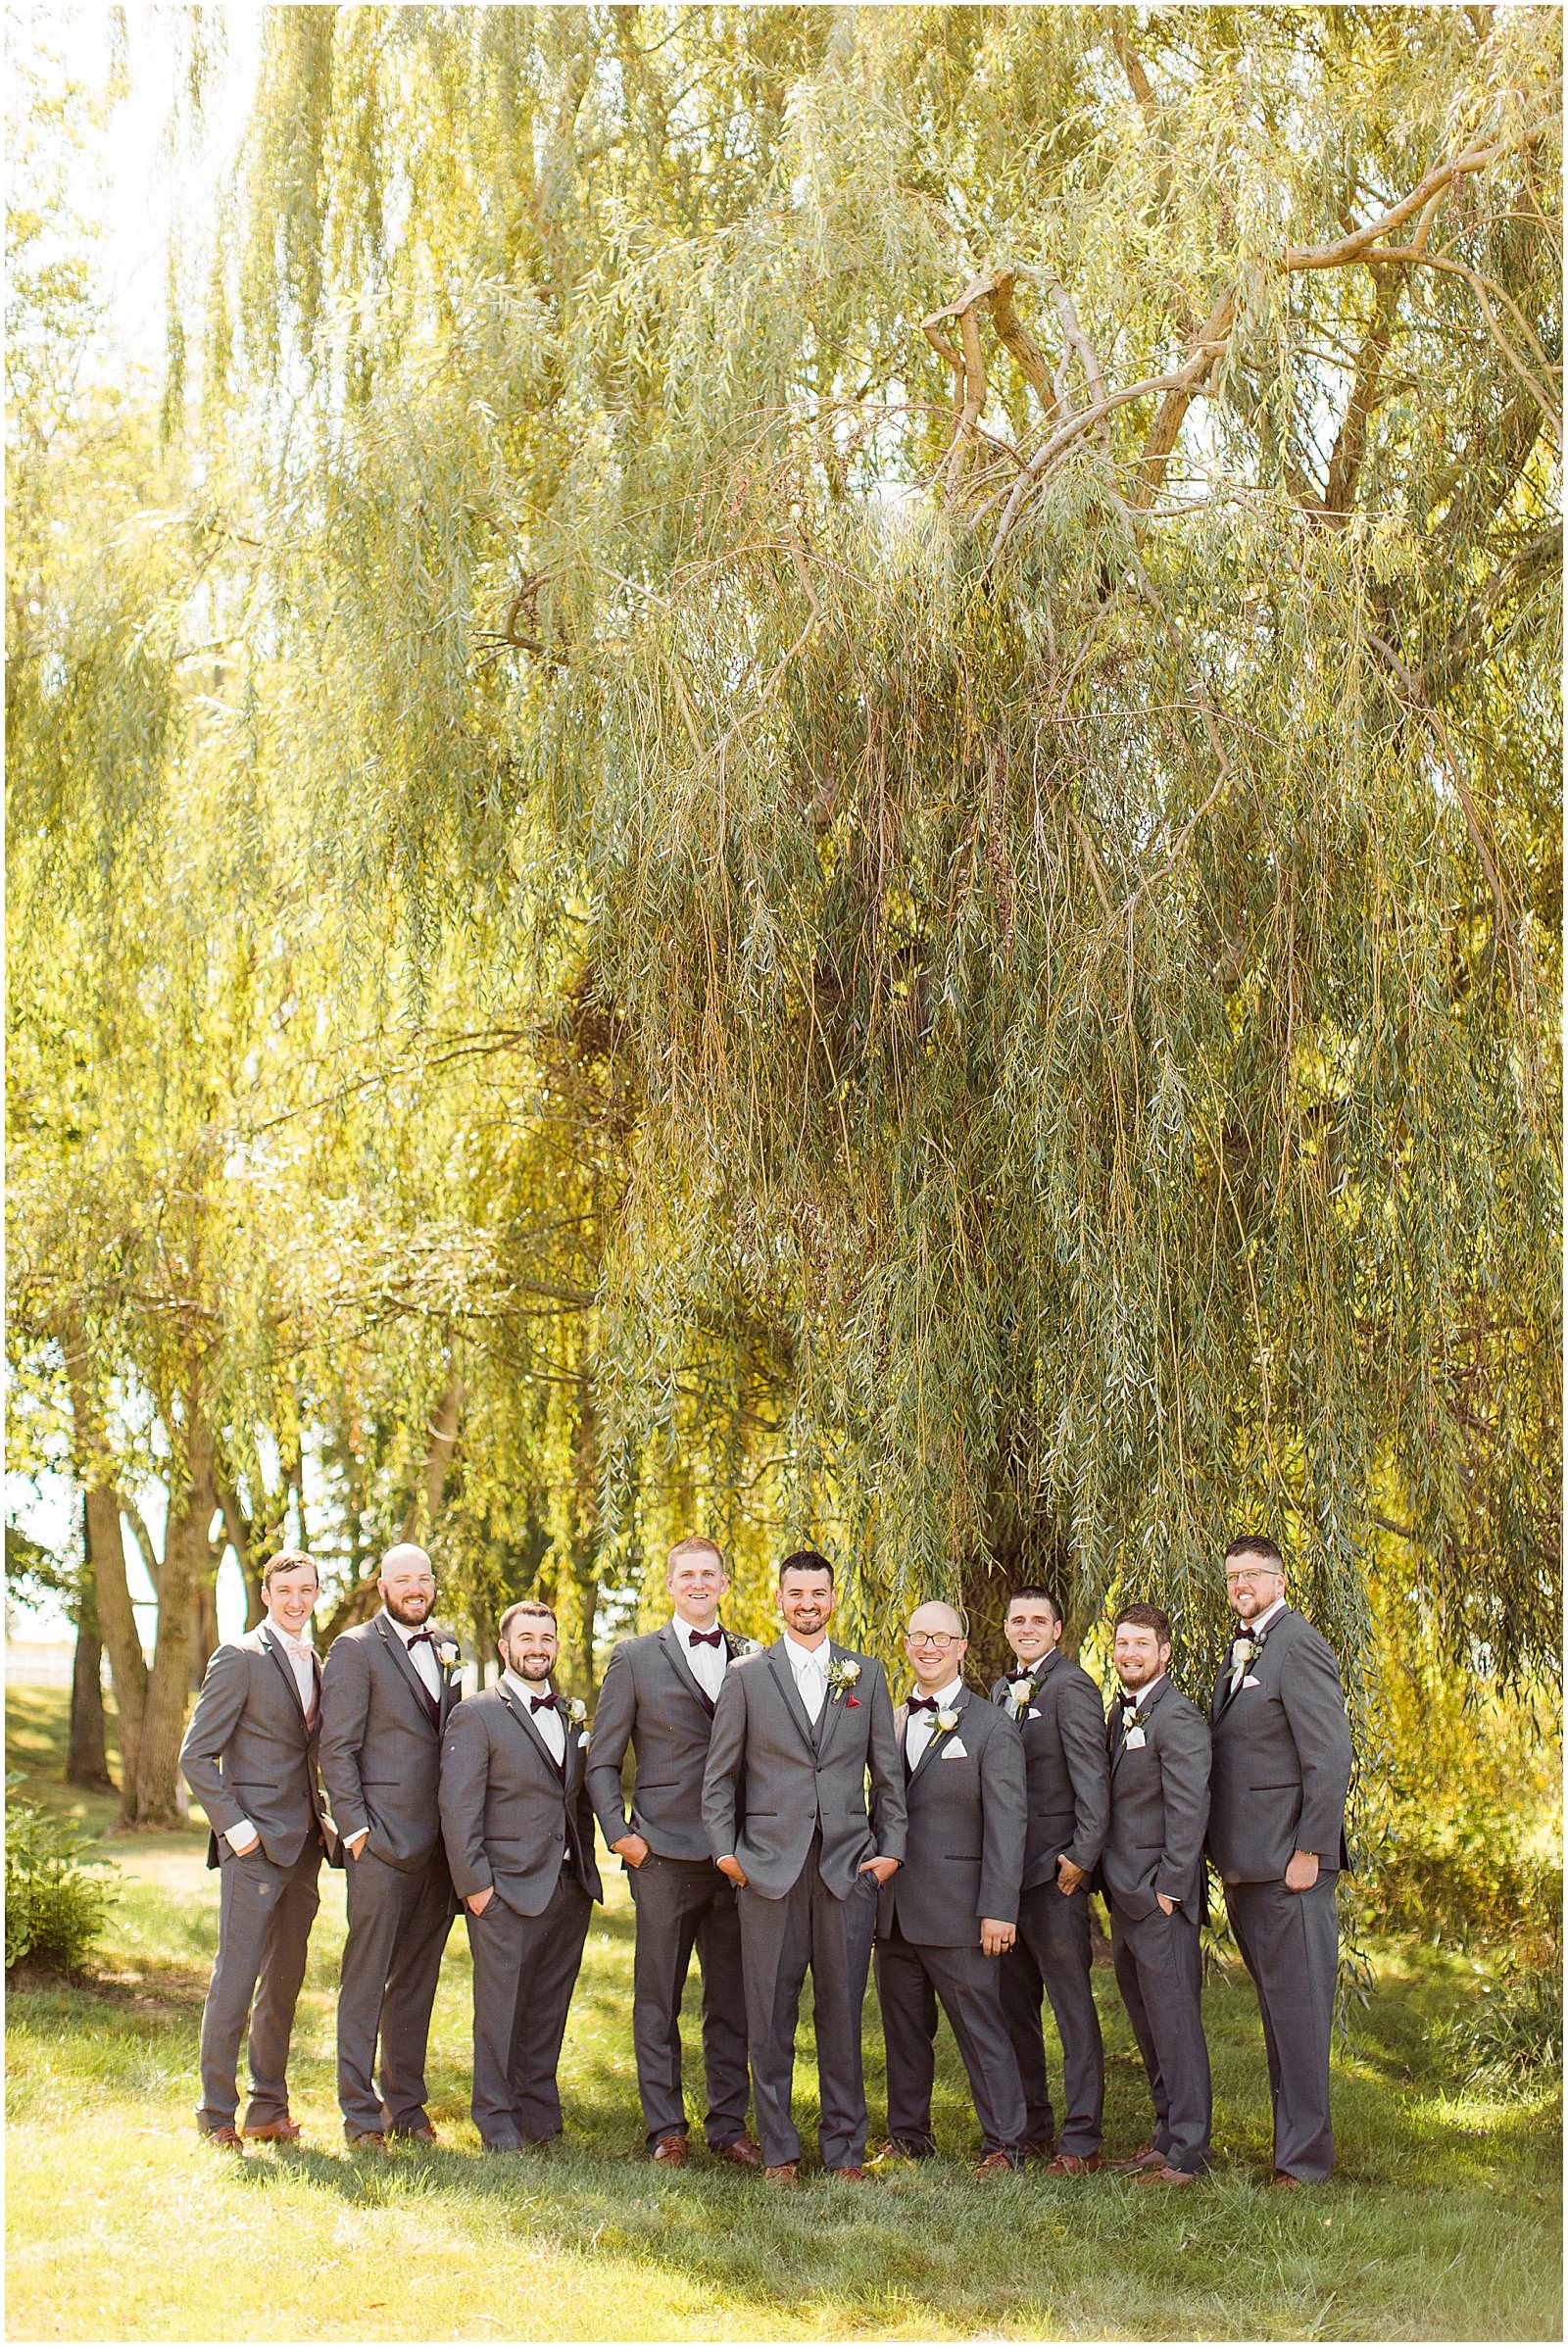 A Stunning Fall Wedding in Indianapolis, IN |. Sally and Andrew | Bret and Brandie Photography 0077.jpg